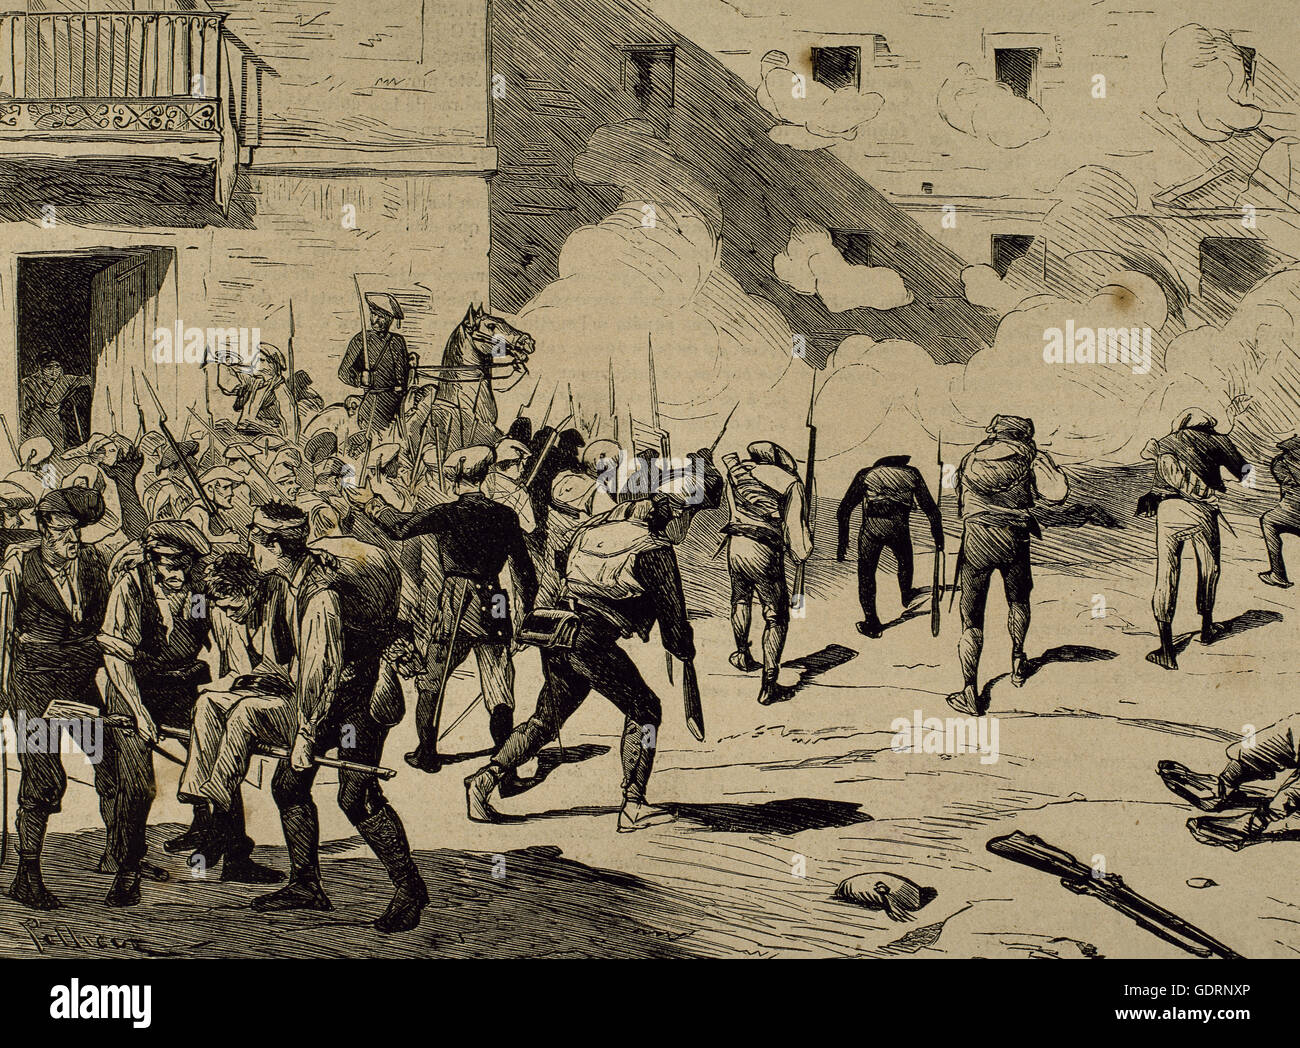 Spain. Third Carlist War. In June 1872 the Carlist general Joan Francesch i Serret (1833-1872) enters in Reus (Catalonia) with 400 soldiers and surprising the liberal garrison. He died in combat. Engraving by Pellicer in 'La Ilustracion Española y Americana', 1872. Stock Photo